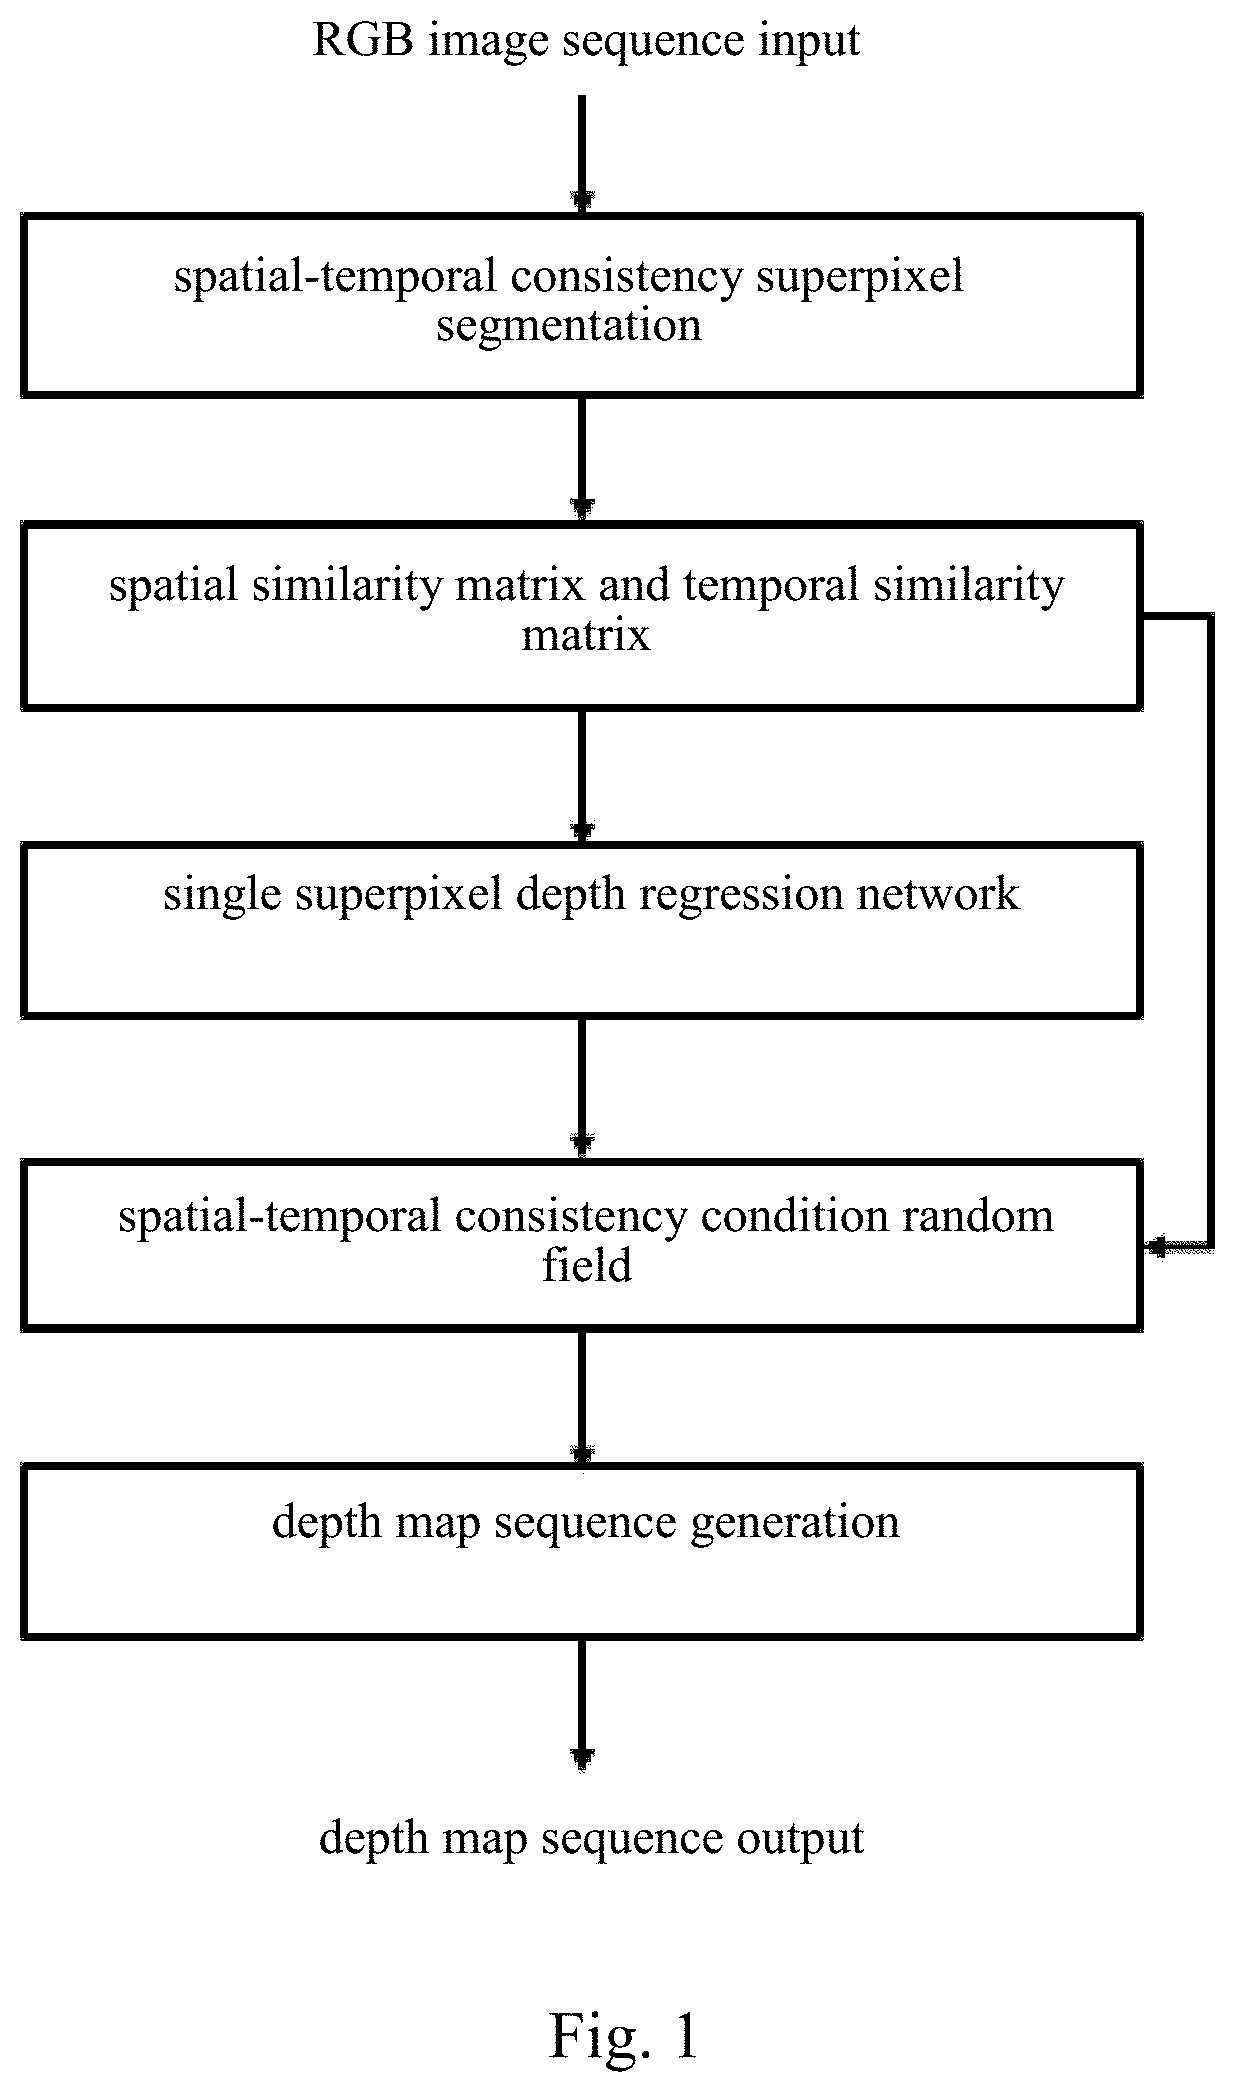 Method for generating spatial-temporally consistent depth map sequences based on convolution neural networks